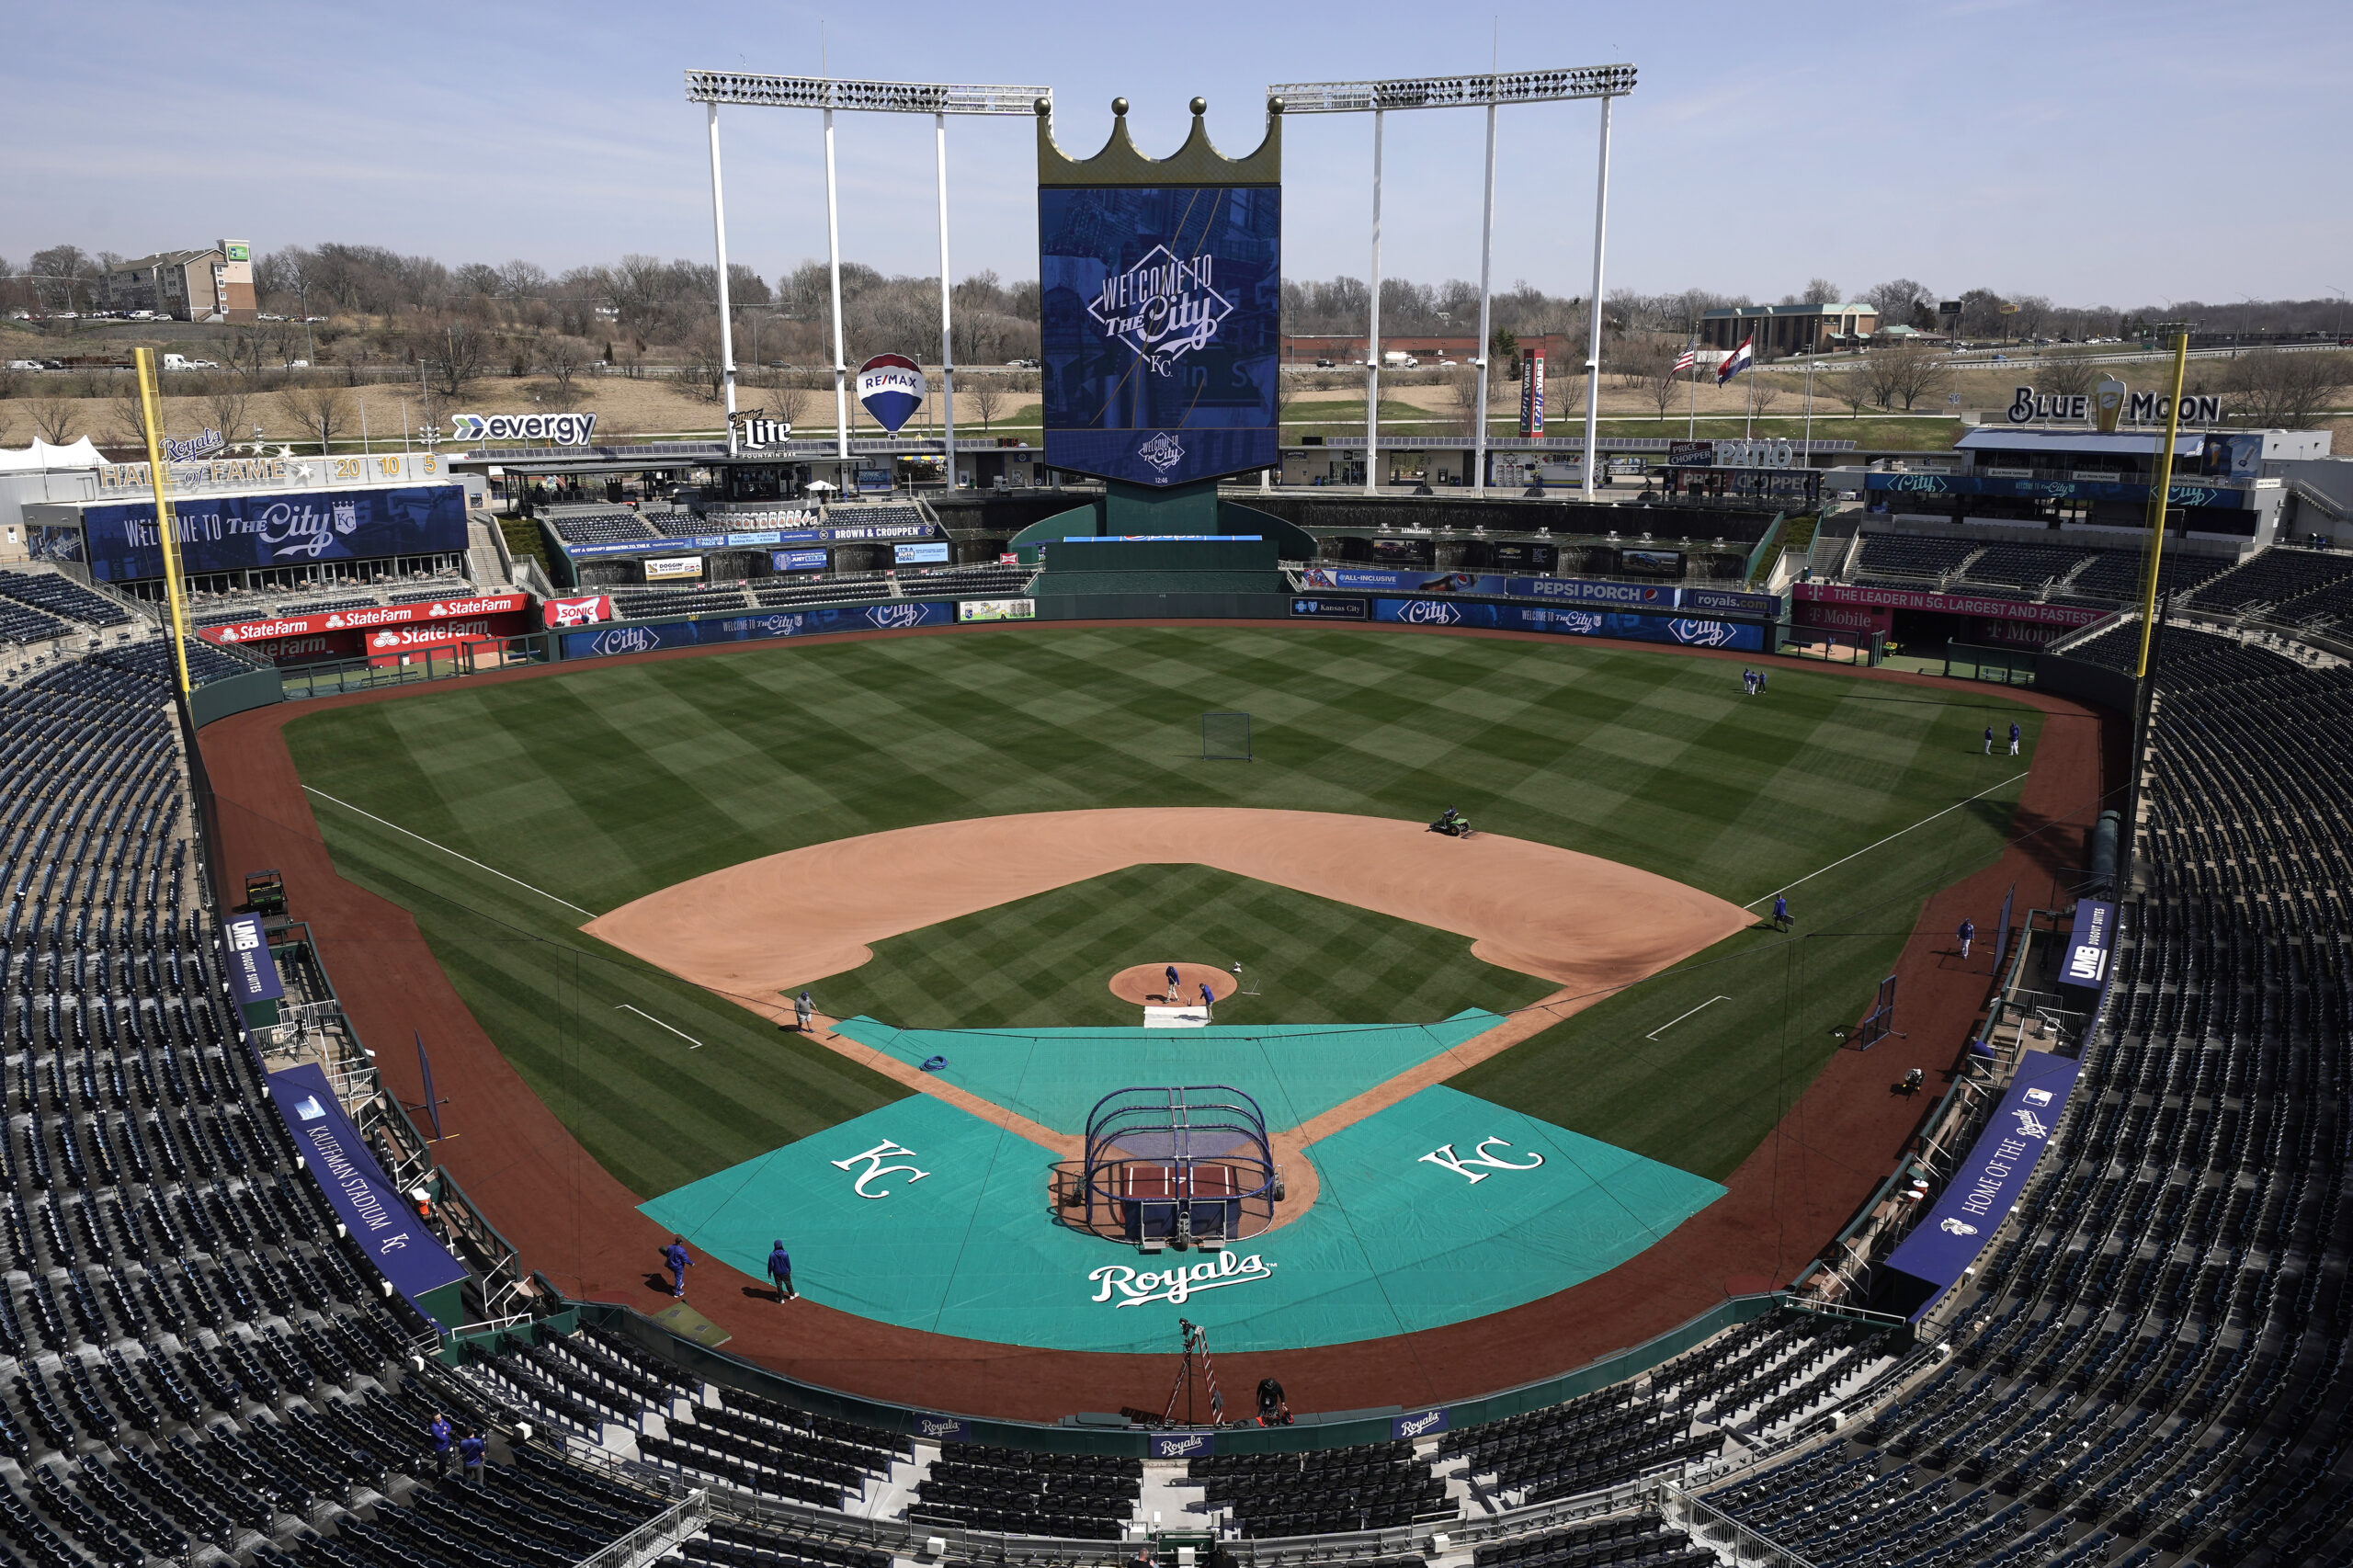 KC Royals owner shares his expectations for the team in 2023